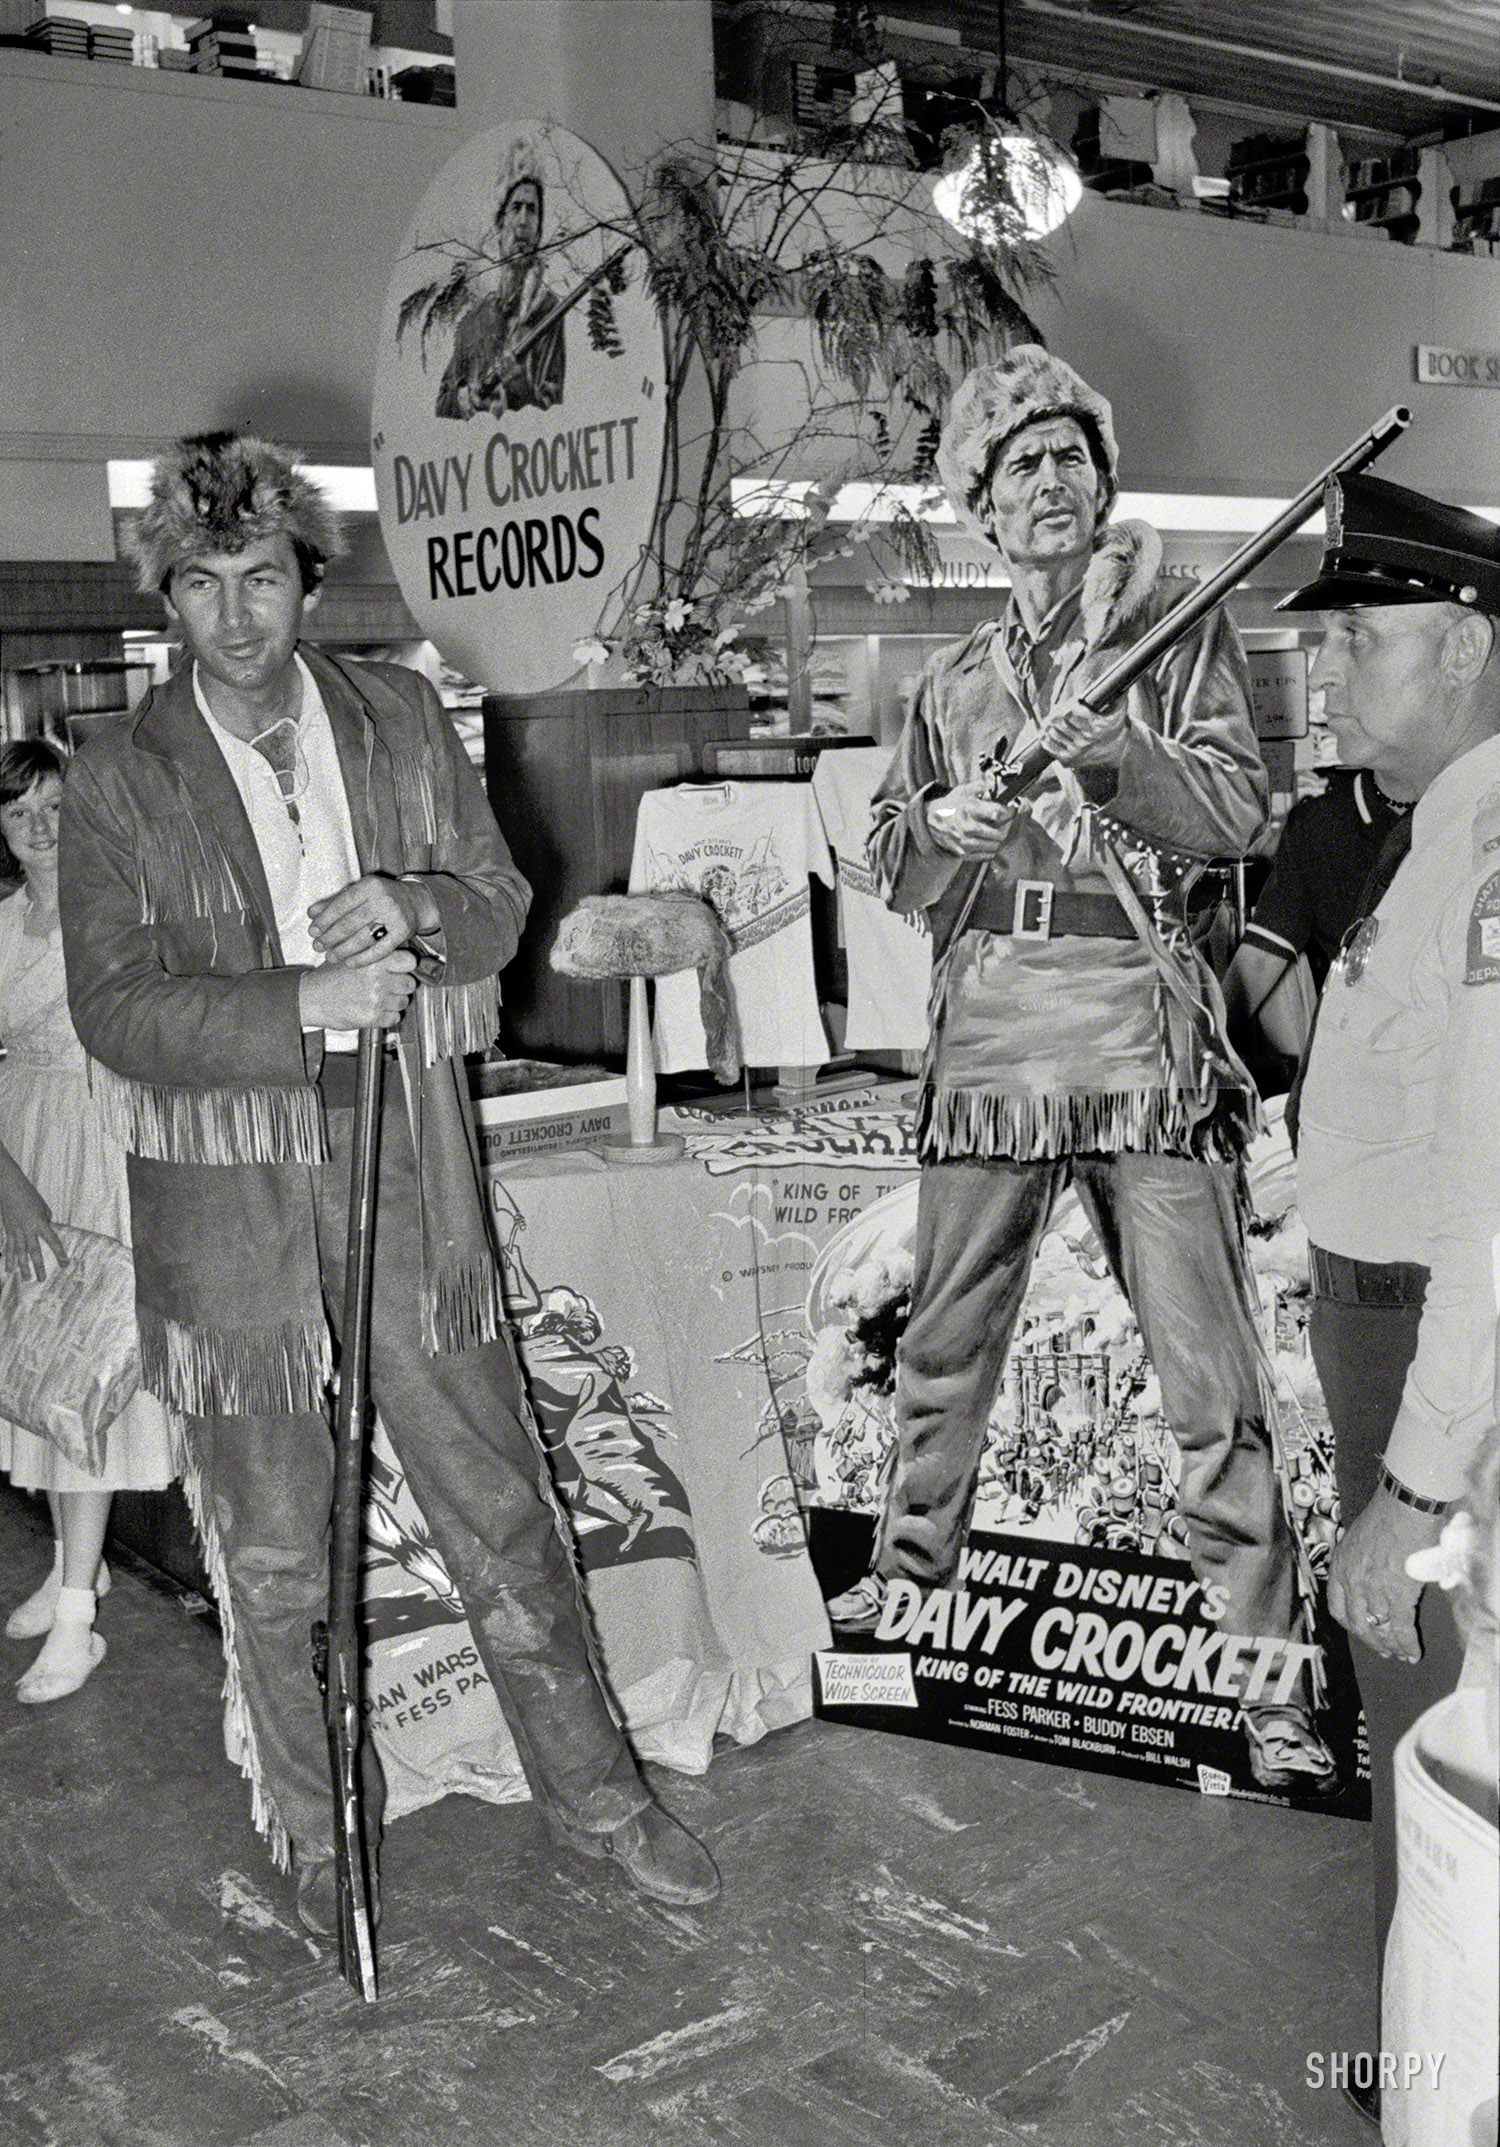 May 1955. "Actor Fess Parker on a 22 city promotional tour as Davy Crockett. Includes public appearances at department stores." From photos by Maurice Terrell for the Look magazine assignment "Meet Davy Crockett." View full size.